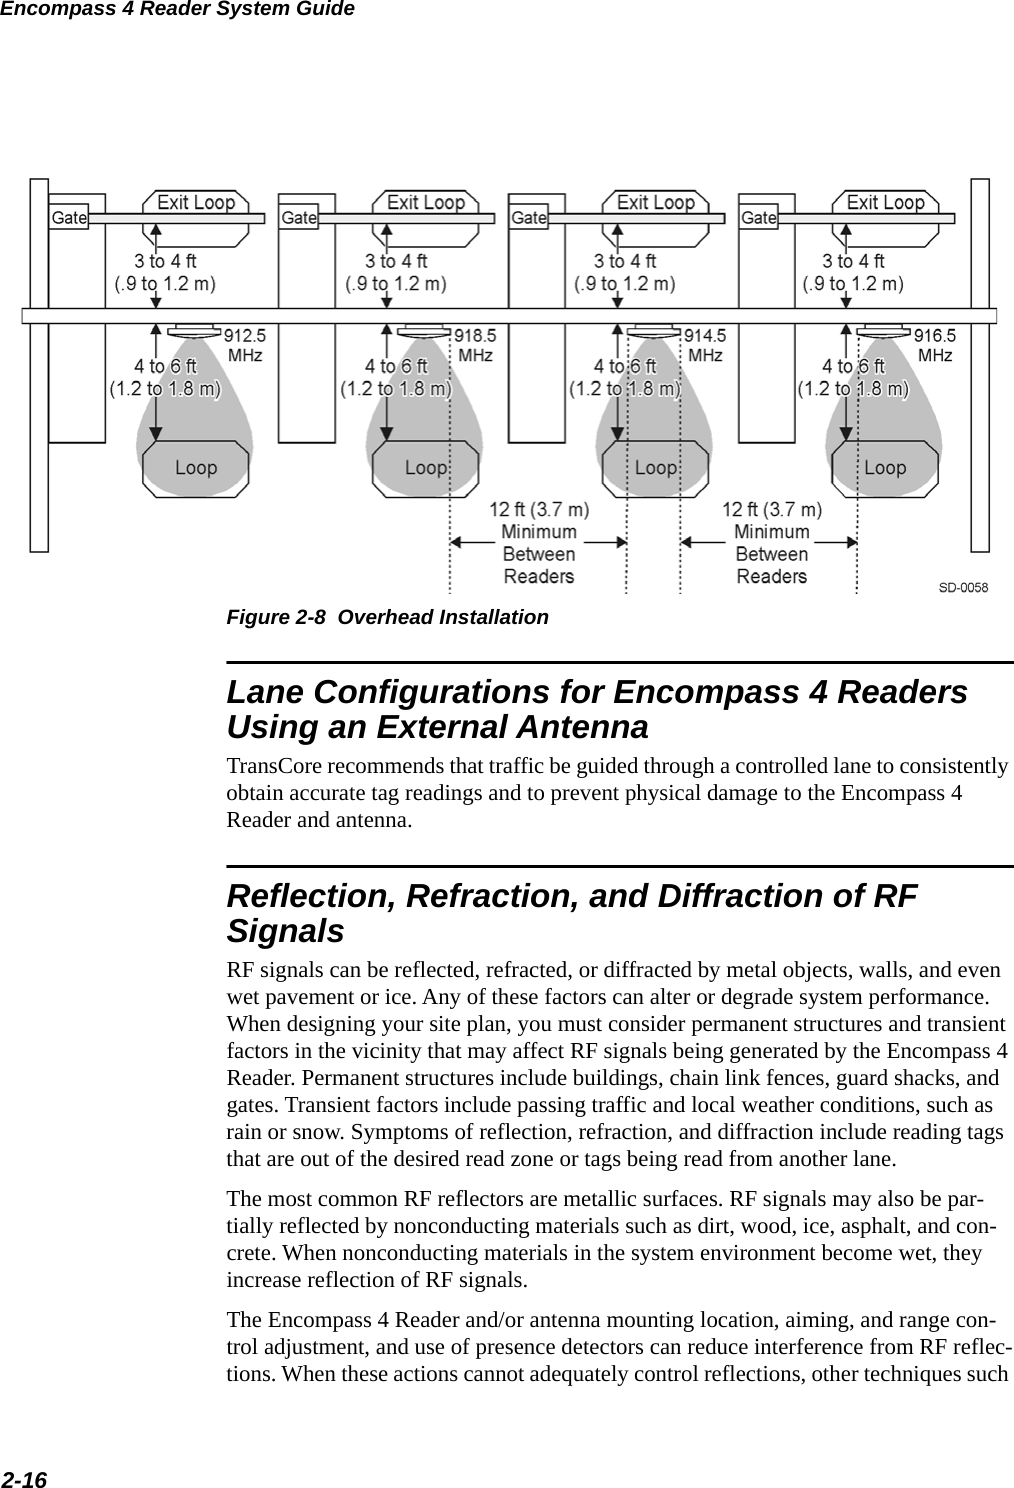 Encompass 4 Reader System Guide2-16 Figure 2-8  Overhead InstallationLane Configurations for Encompass 4 Readers Using an External AntennaTransCore recommends that traffic be guided through a controlled lane to consistently obtain accurate tag readings and to prevent physical damage to the Encompass 4 Reader and antenna.Reflection, Refraction, and Diffraction of RF SignalsRF signals can be reflected, refracted, or diffracted by metal objects, walls, and even wet pavement or ice. Any of these factors can alter or degrade system performance. When designing your site plan, you must consider permanent structures and transient factors in the vicinity that may affect RF signals being generated by the Encompass 4 Reader. Permanent structures include buildings, chain link fences, guard shacks, and gates. Transient factors include passing traffic and local weather conditions, such as rain or snow. Symptoms of reflection, refraction, and diffraction include reading tags that are out of the desired read zone or tags being read from another lane.The most common RF reflectors are metallic surfaces. RF signals may also be par-tially reflected by nonconducting materials such as dirt, wood, ice, asphalt, and con-crete. When nonconducting materials in the system environment become wet, they increase reflection of RF signals.The Encompass 4 Reader and/or antenna mounting location, aiming, and range con-trol adjustment, and use of presence detectors can reduce interference from RF reflec-tions. When these actions cannot adequately control reflections, other techniques such 